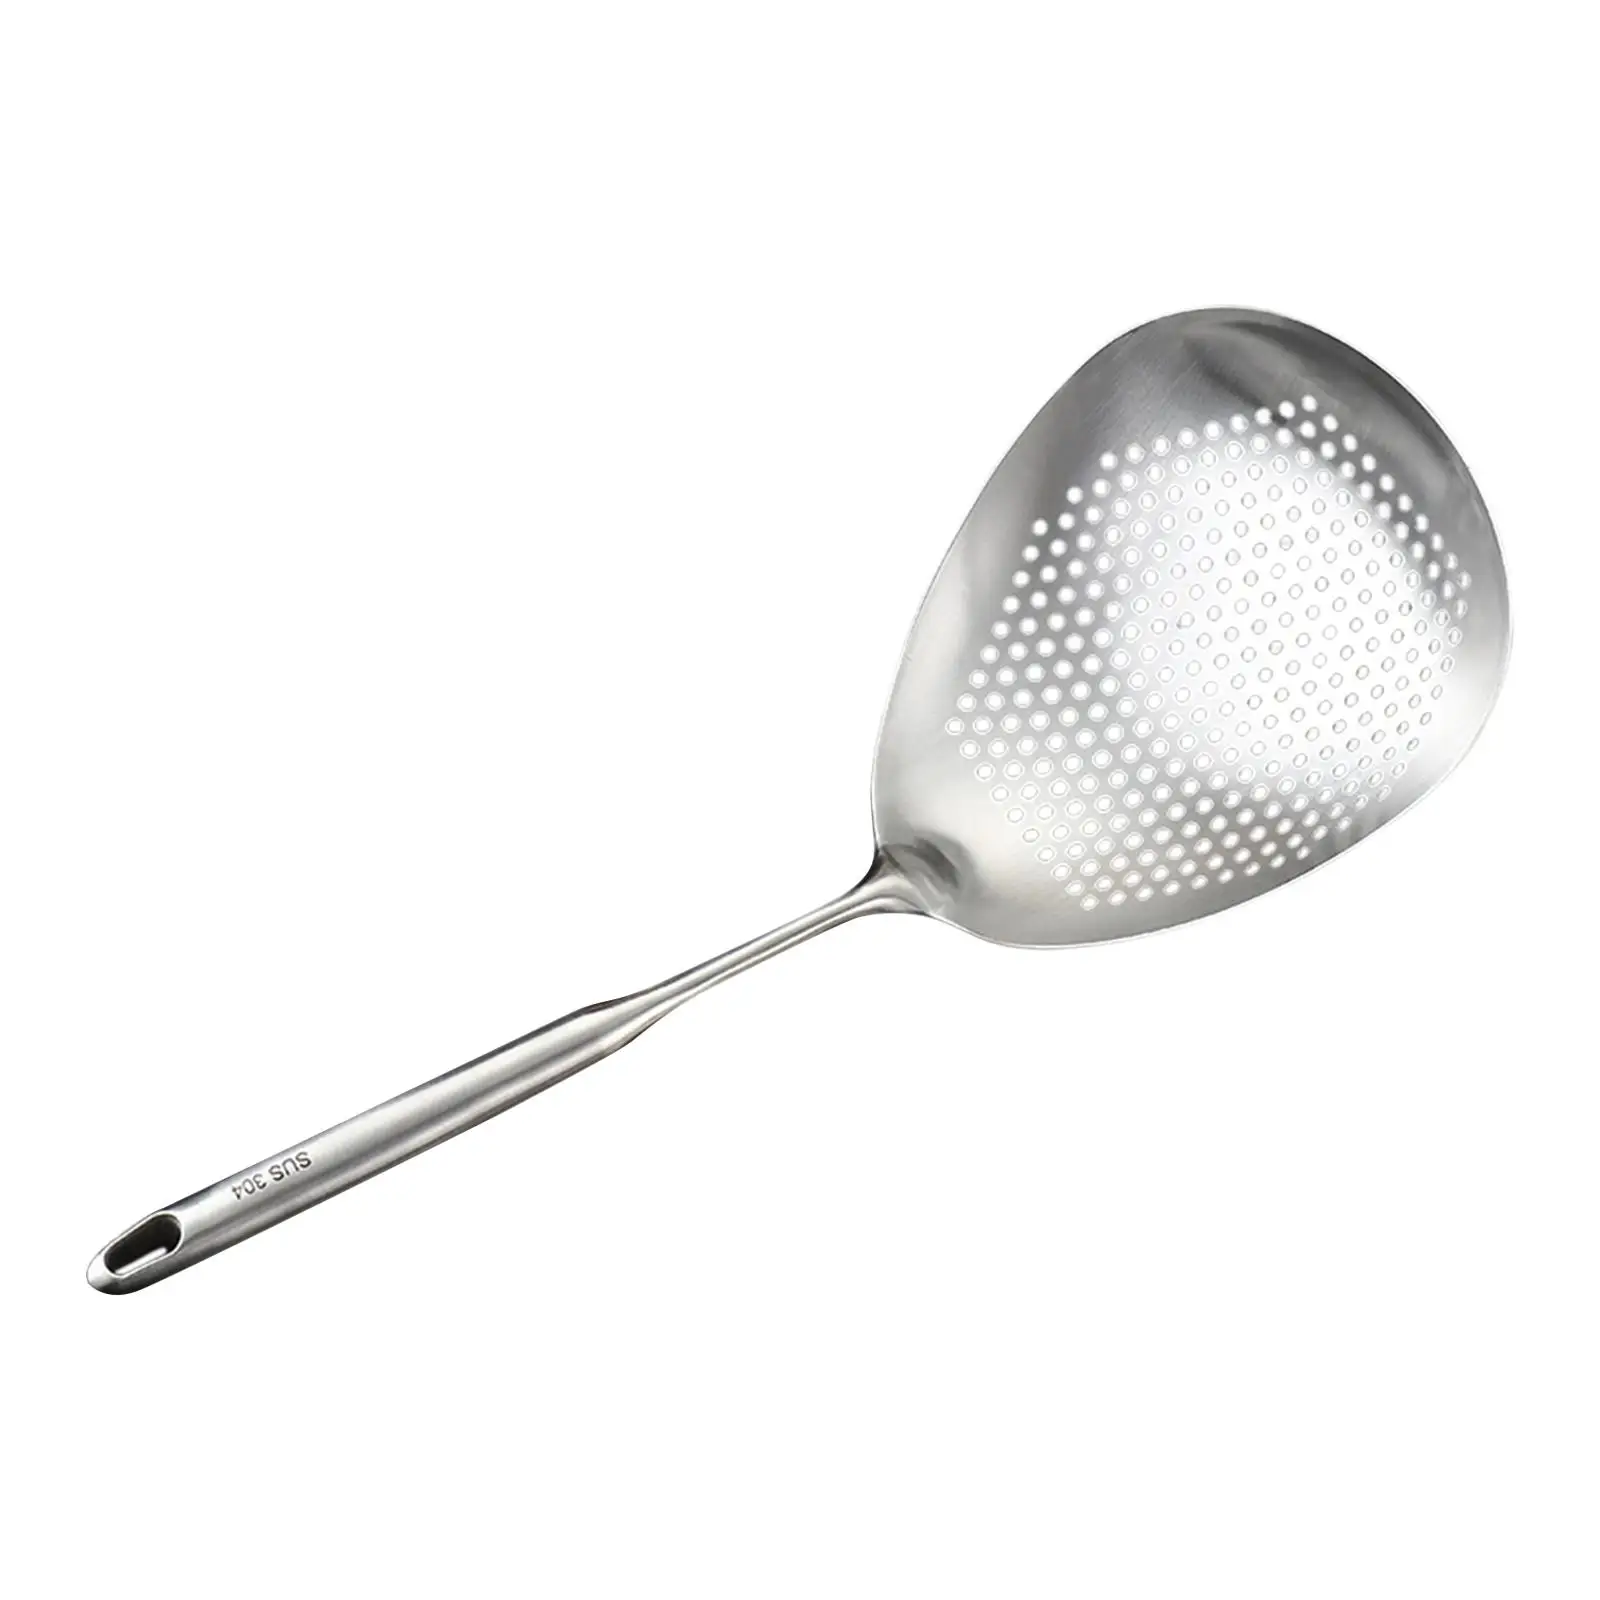 Professional Skimmer Slotted Spoon Durable Food Strainer Ladle Cooking Colander Spoon for Scooping Draining Noodles Pasta Frying